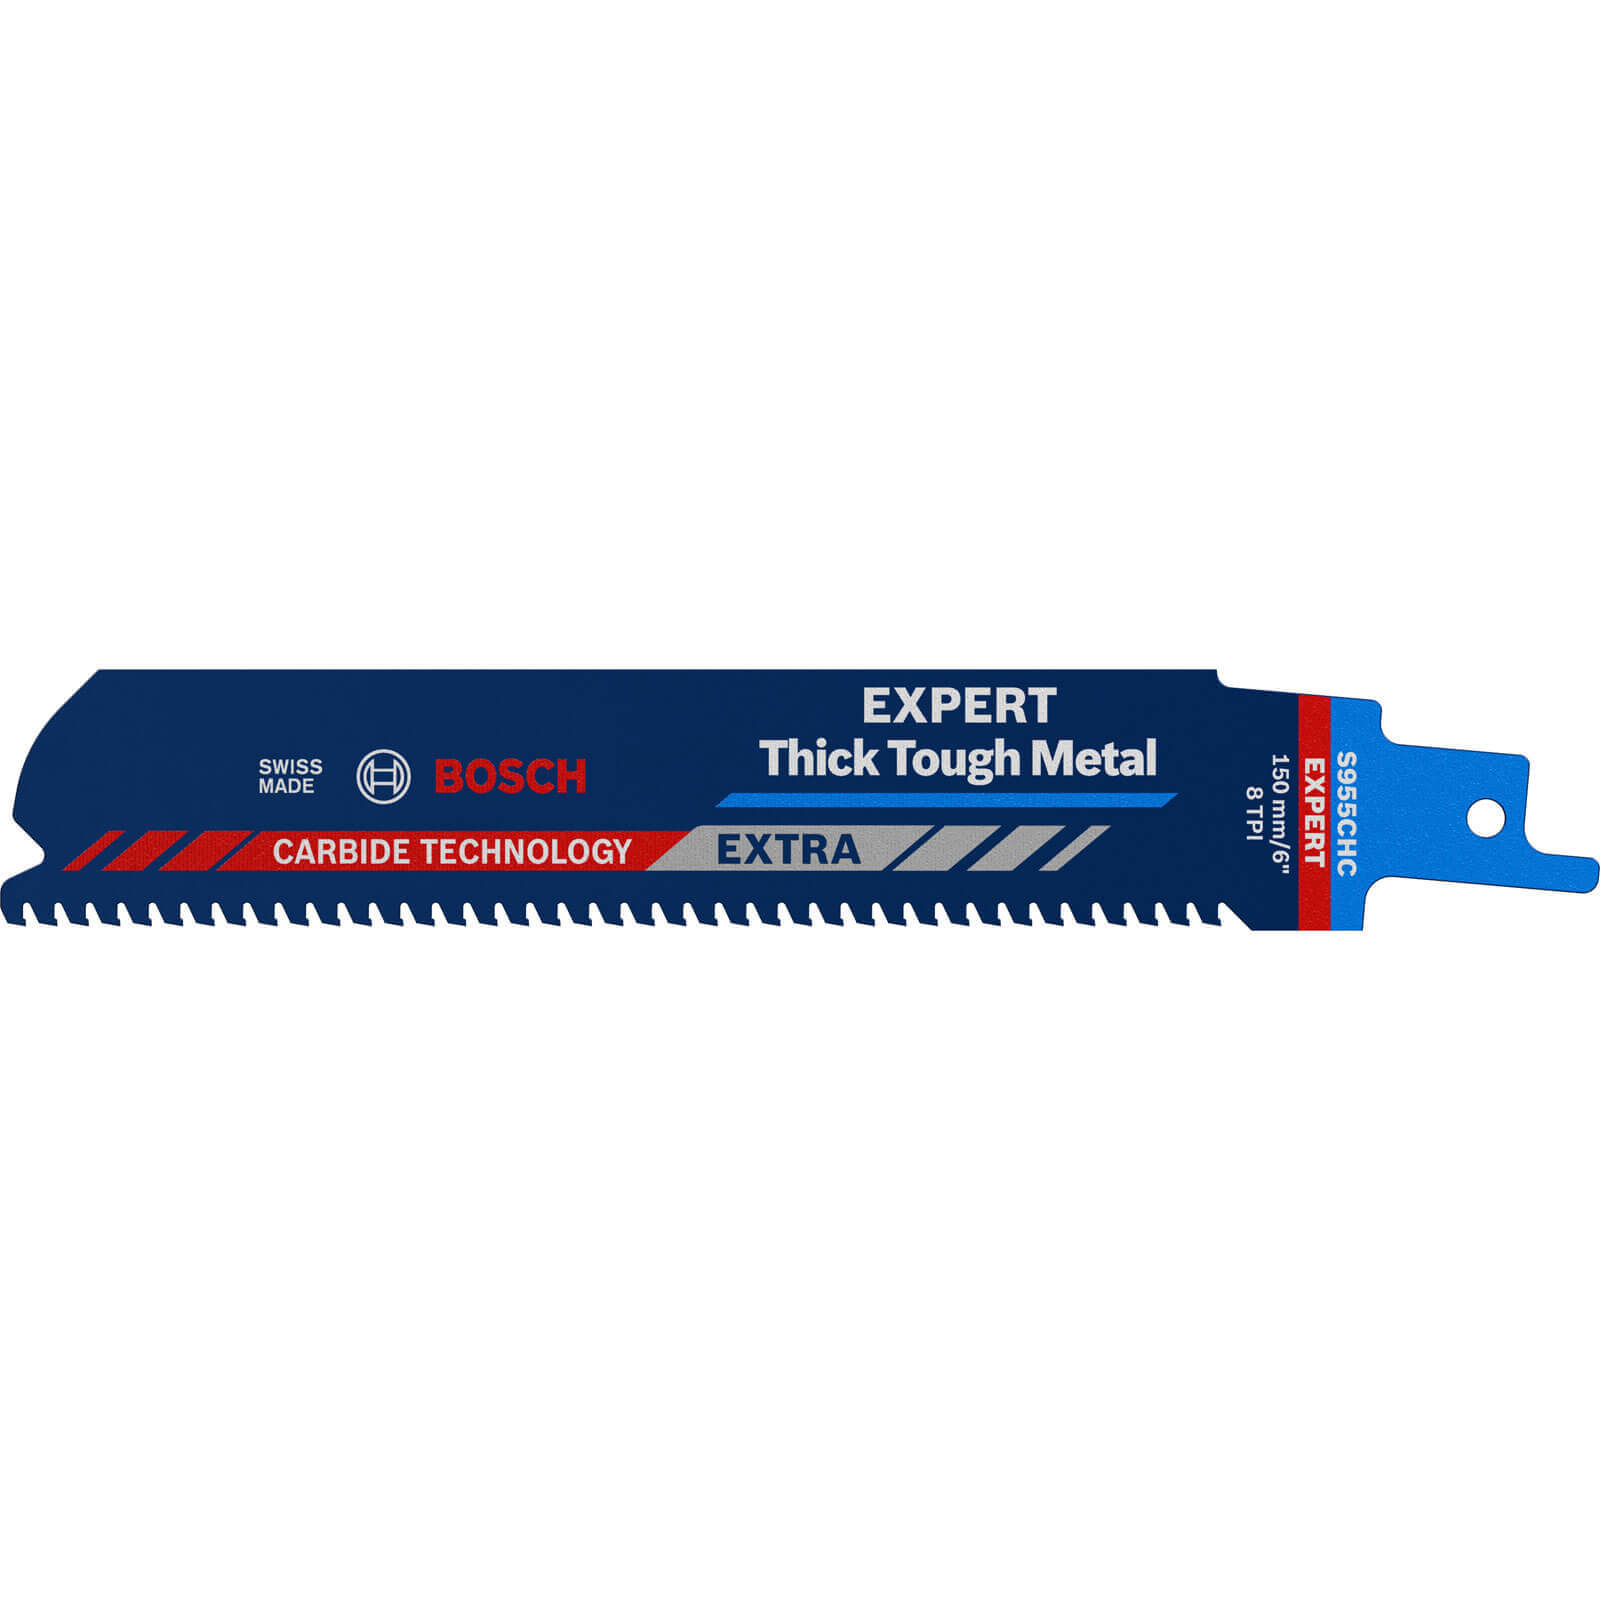 Bosch Expert S955CHC Thick Tough Metal Cutting Reciprocating Saw Blades 150mm Pack of 1